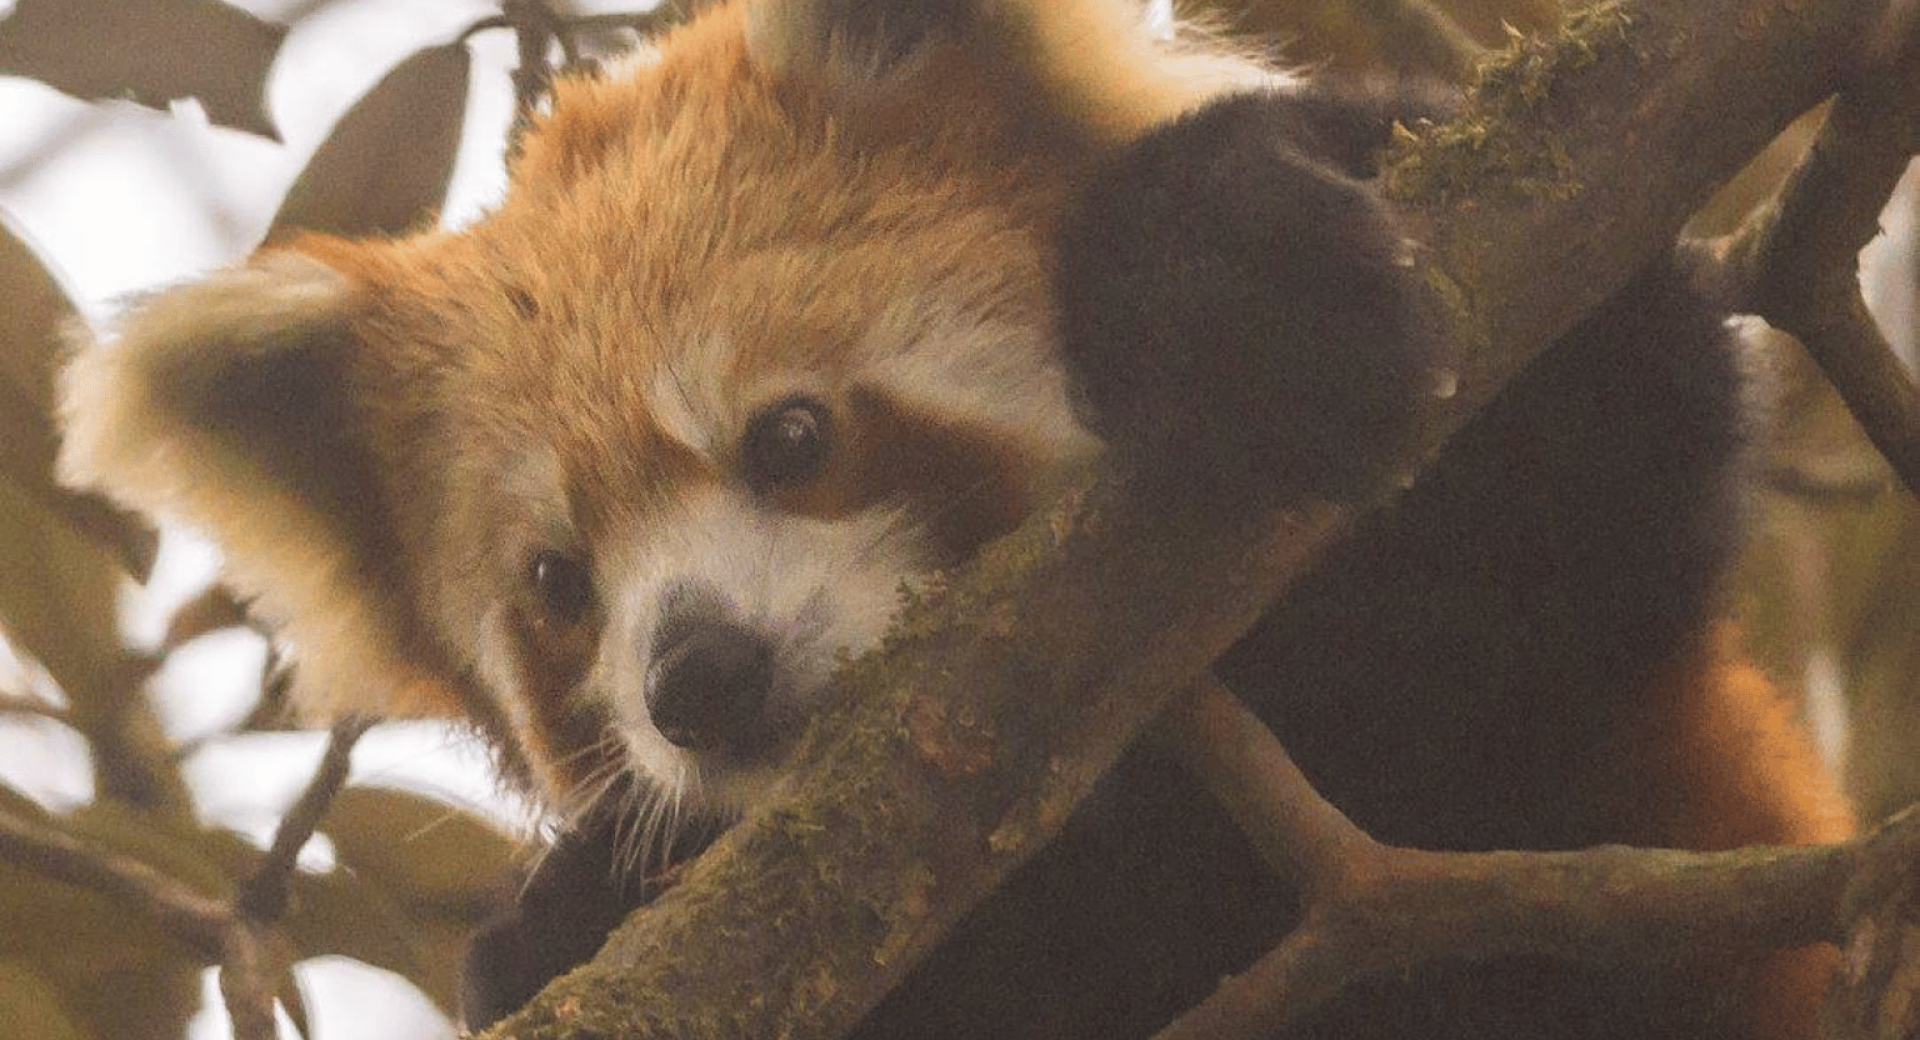 Improve Your Photography Skills While Helping Red Panda Conservation in 2023